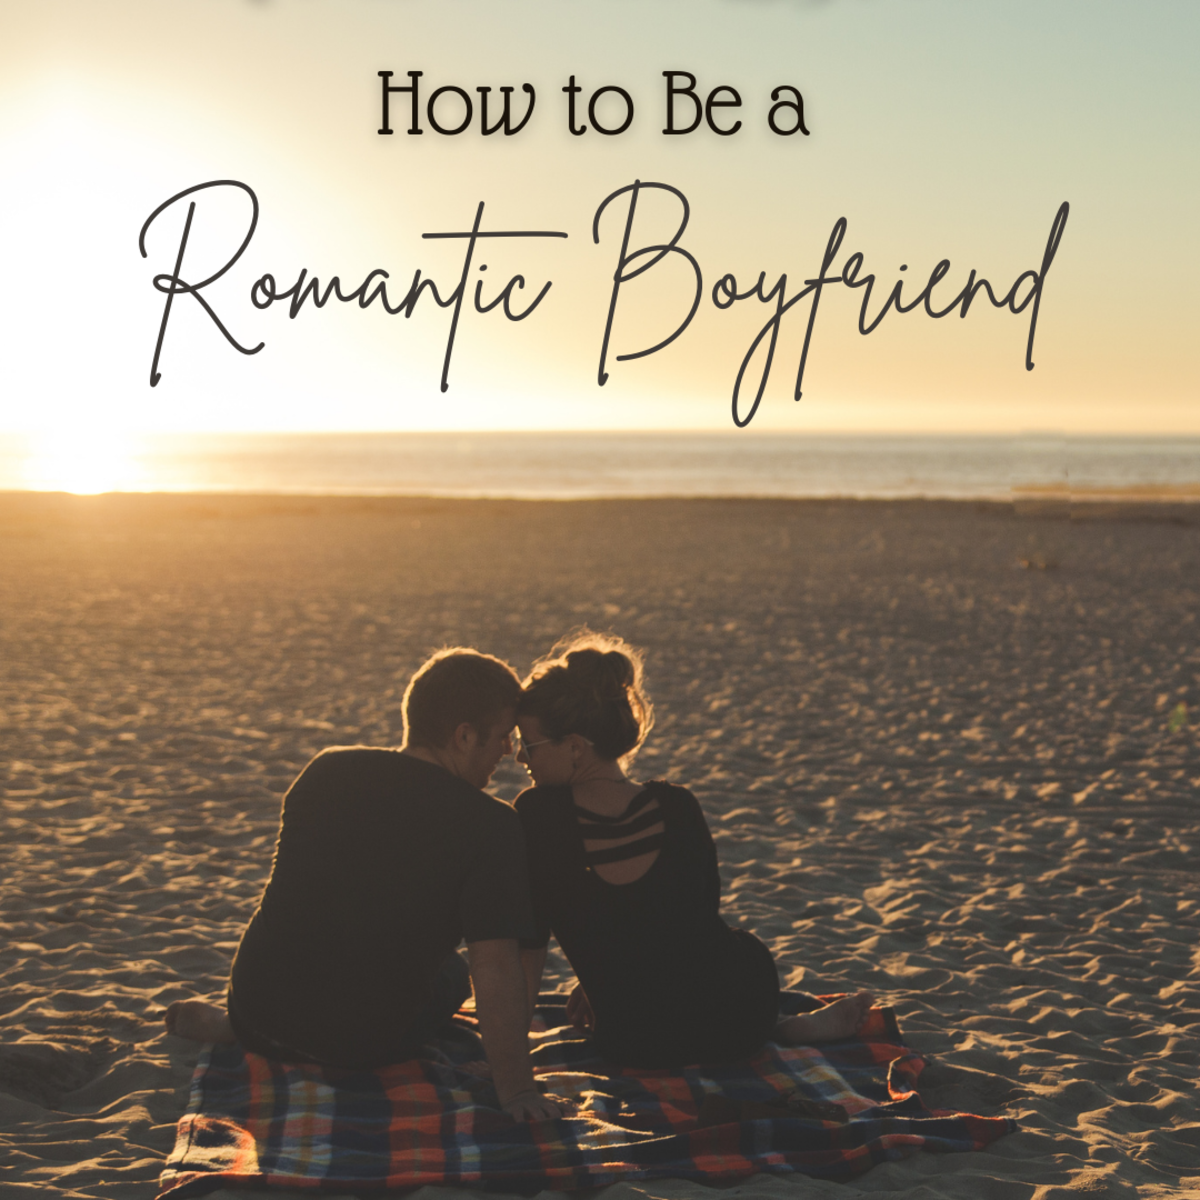 How to Be a Romantic Boyfriend to Your Girlfriend